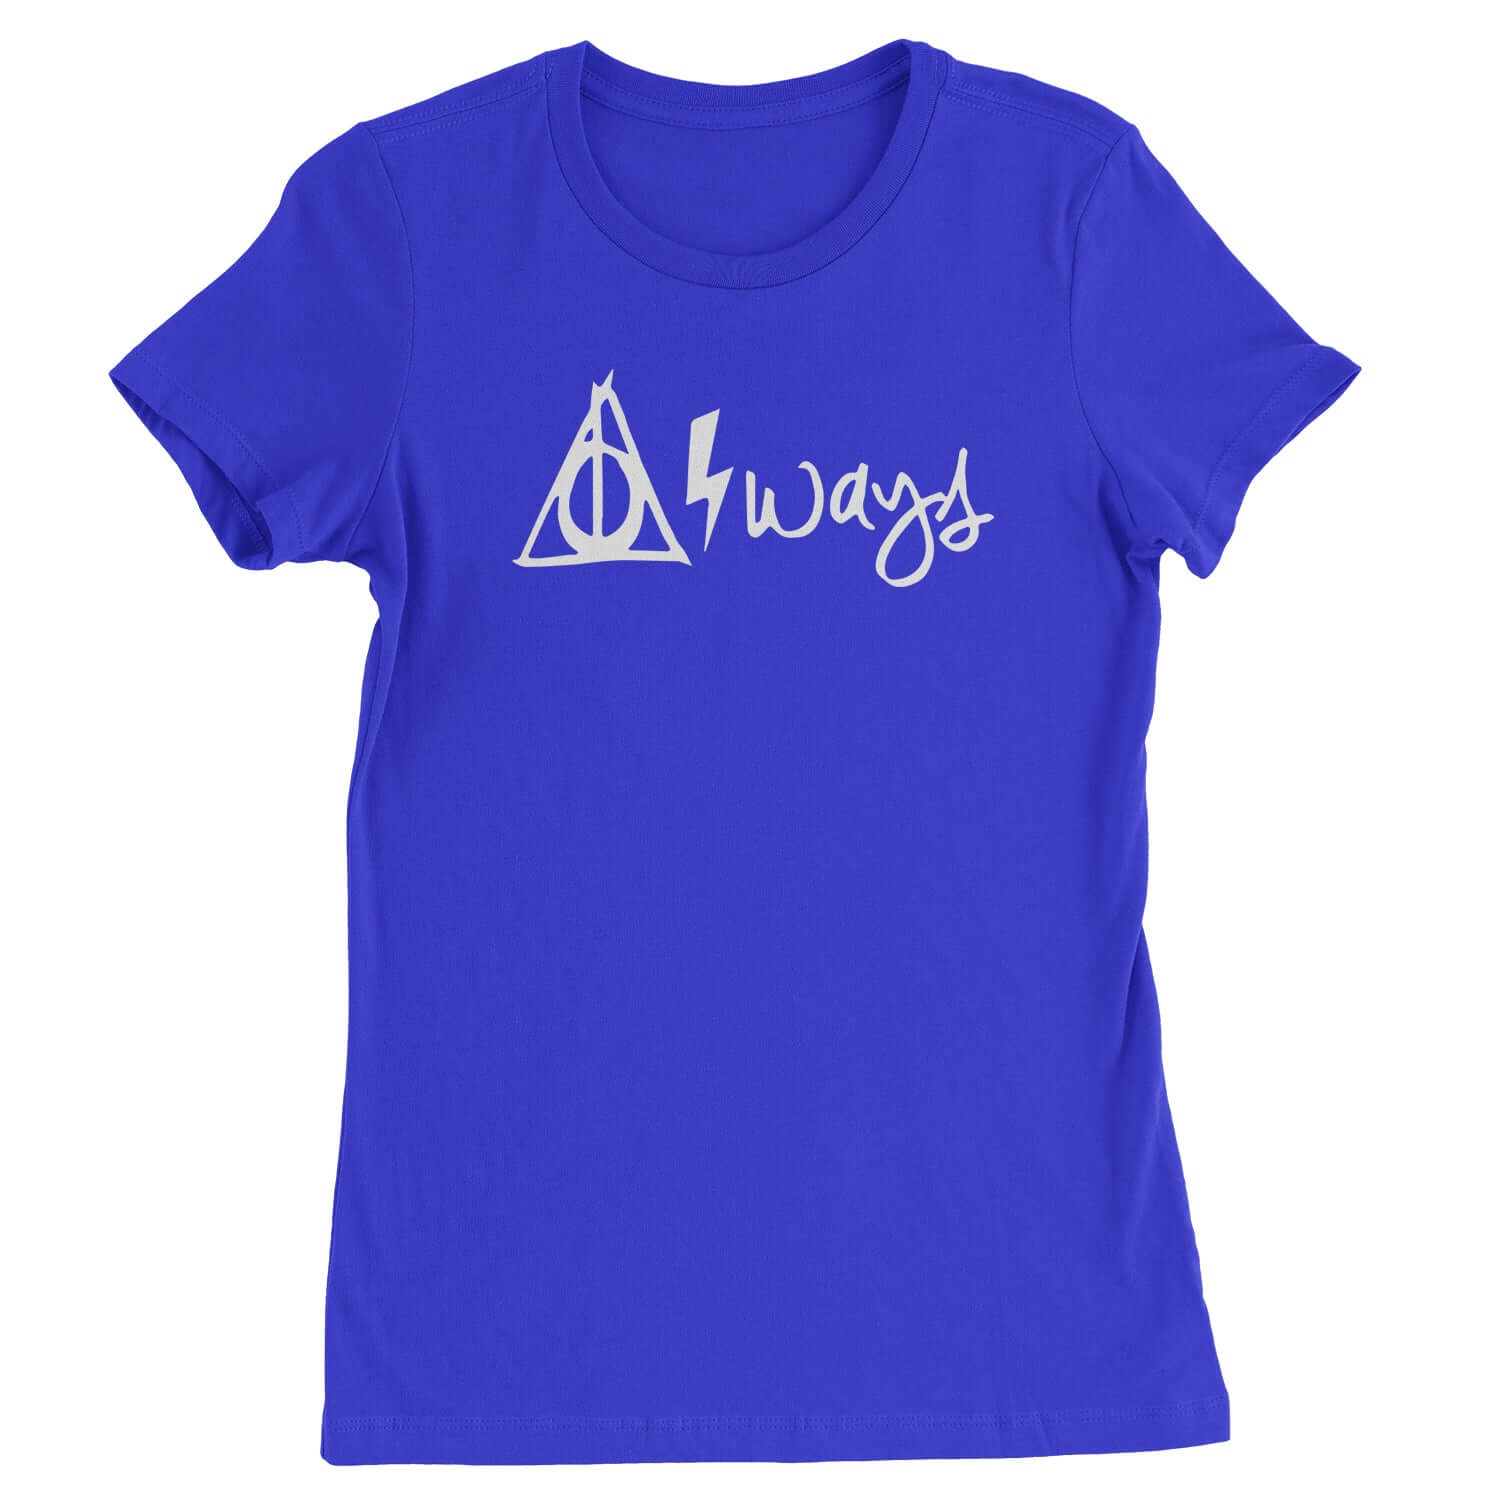 Always Lightning Bolt Womens T-shirt #expressiontees by Expression Tees